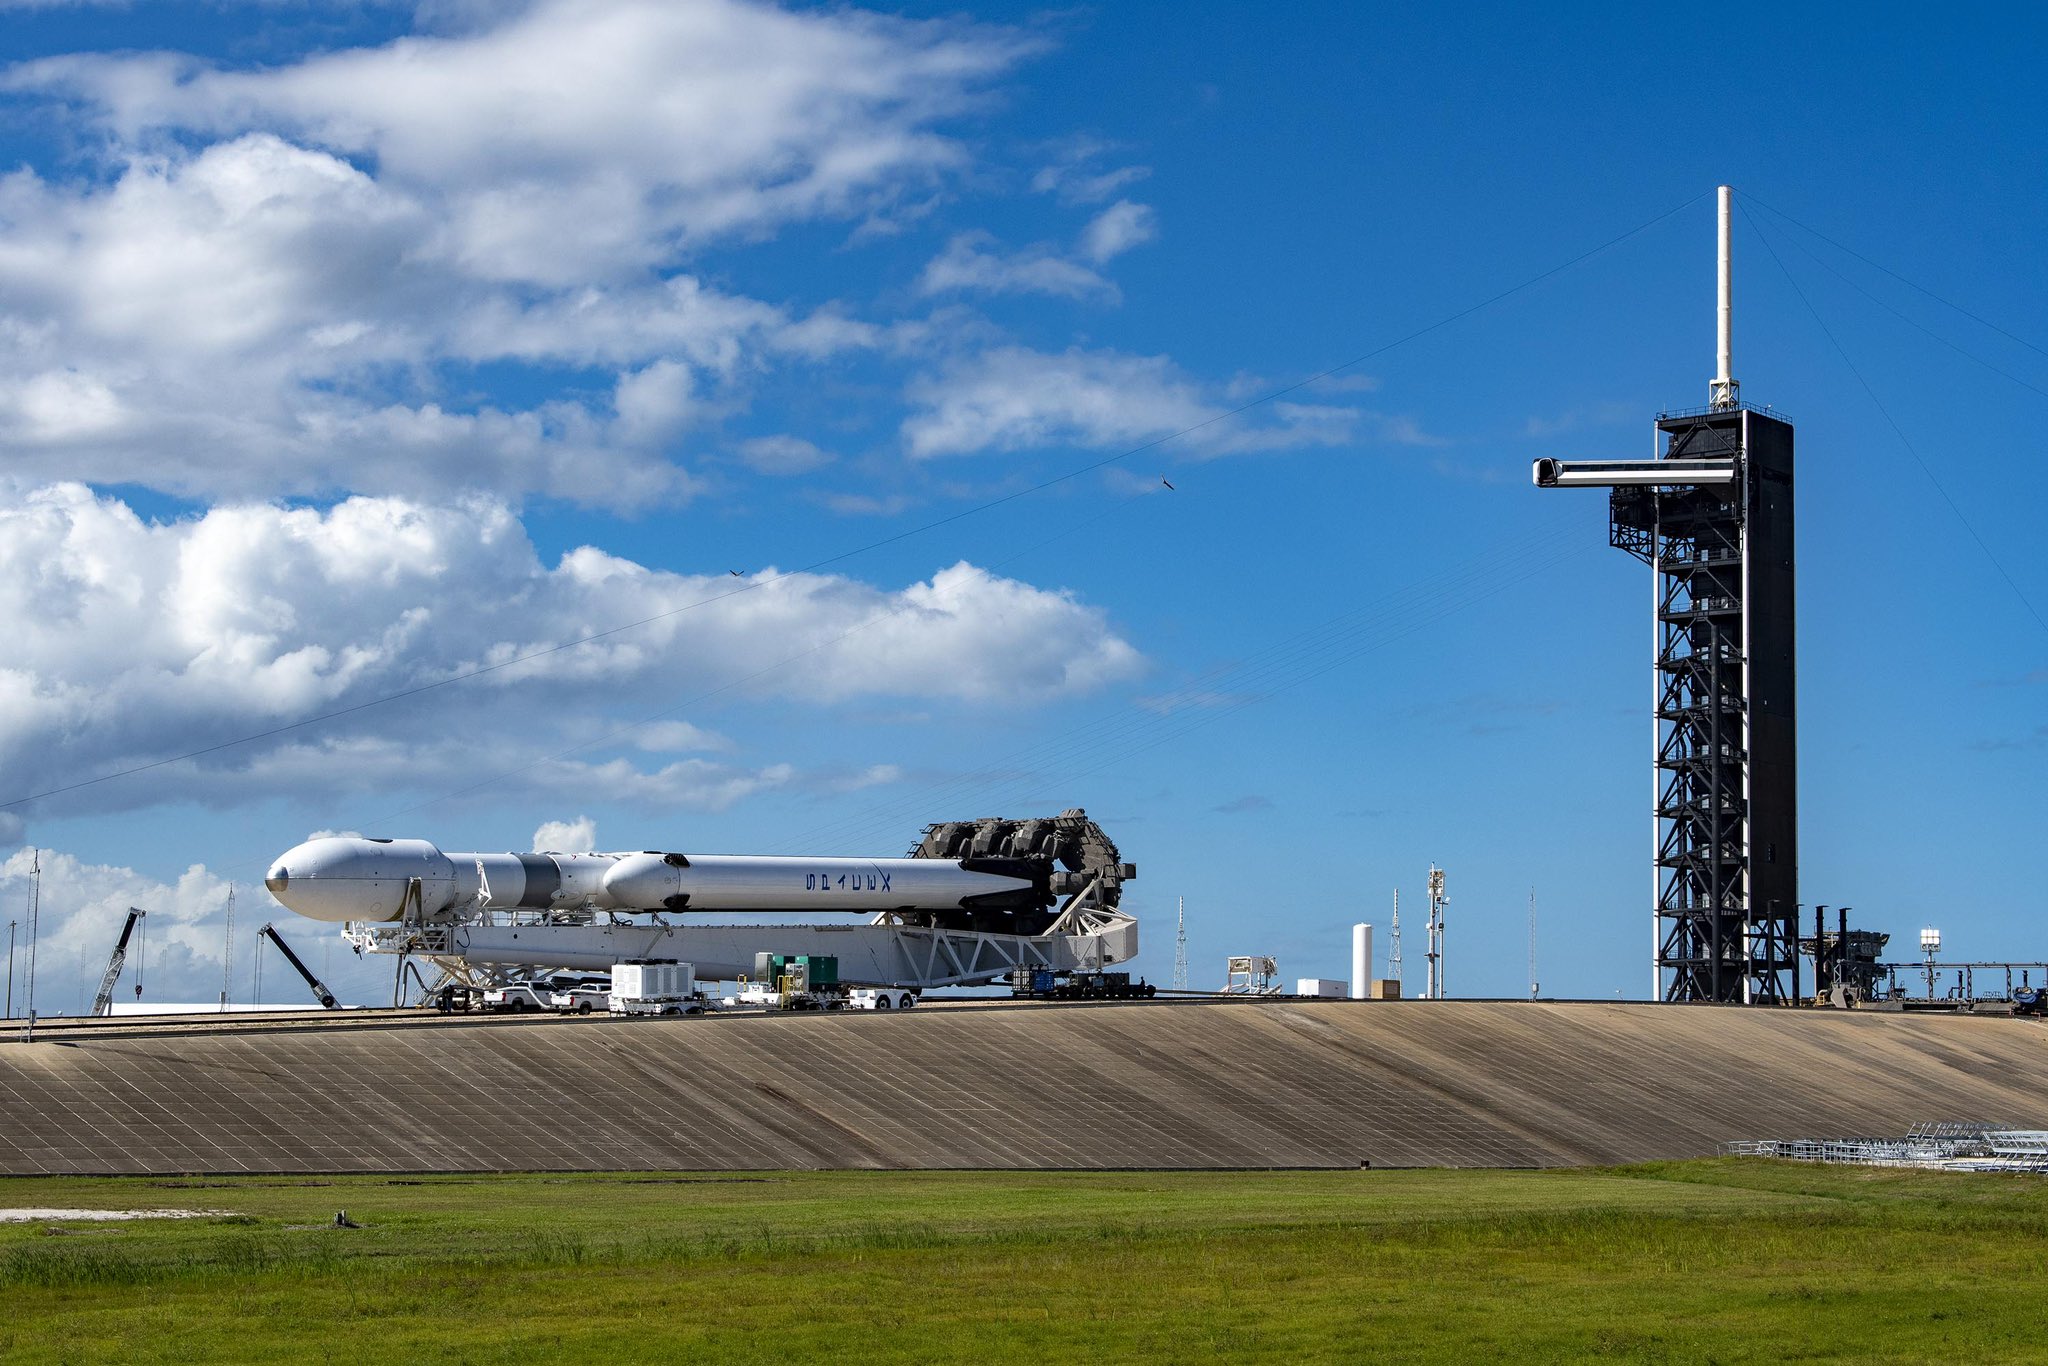 Spacex Rolls Out Falcon Heavy Rocket Ahead Of Tuesday Launch Photo Space